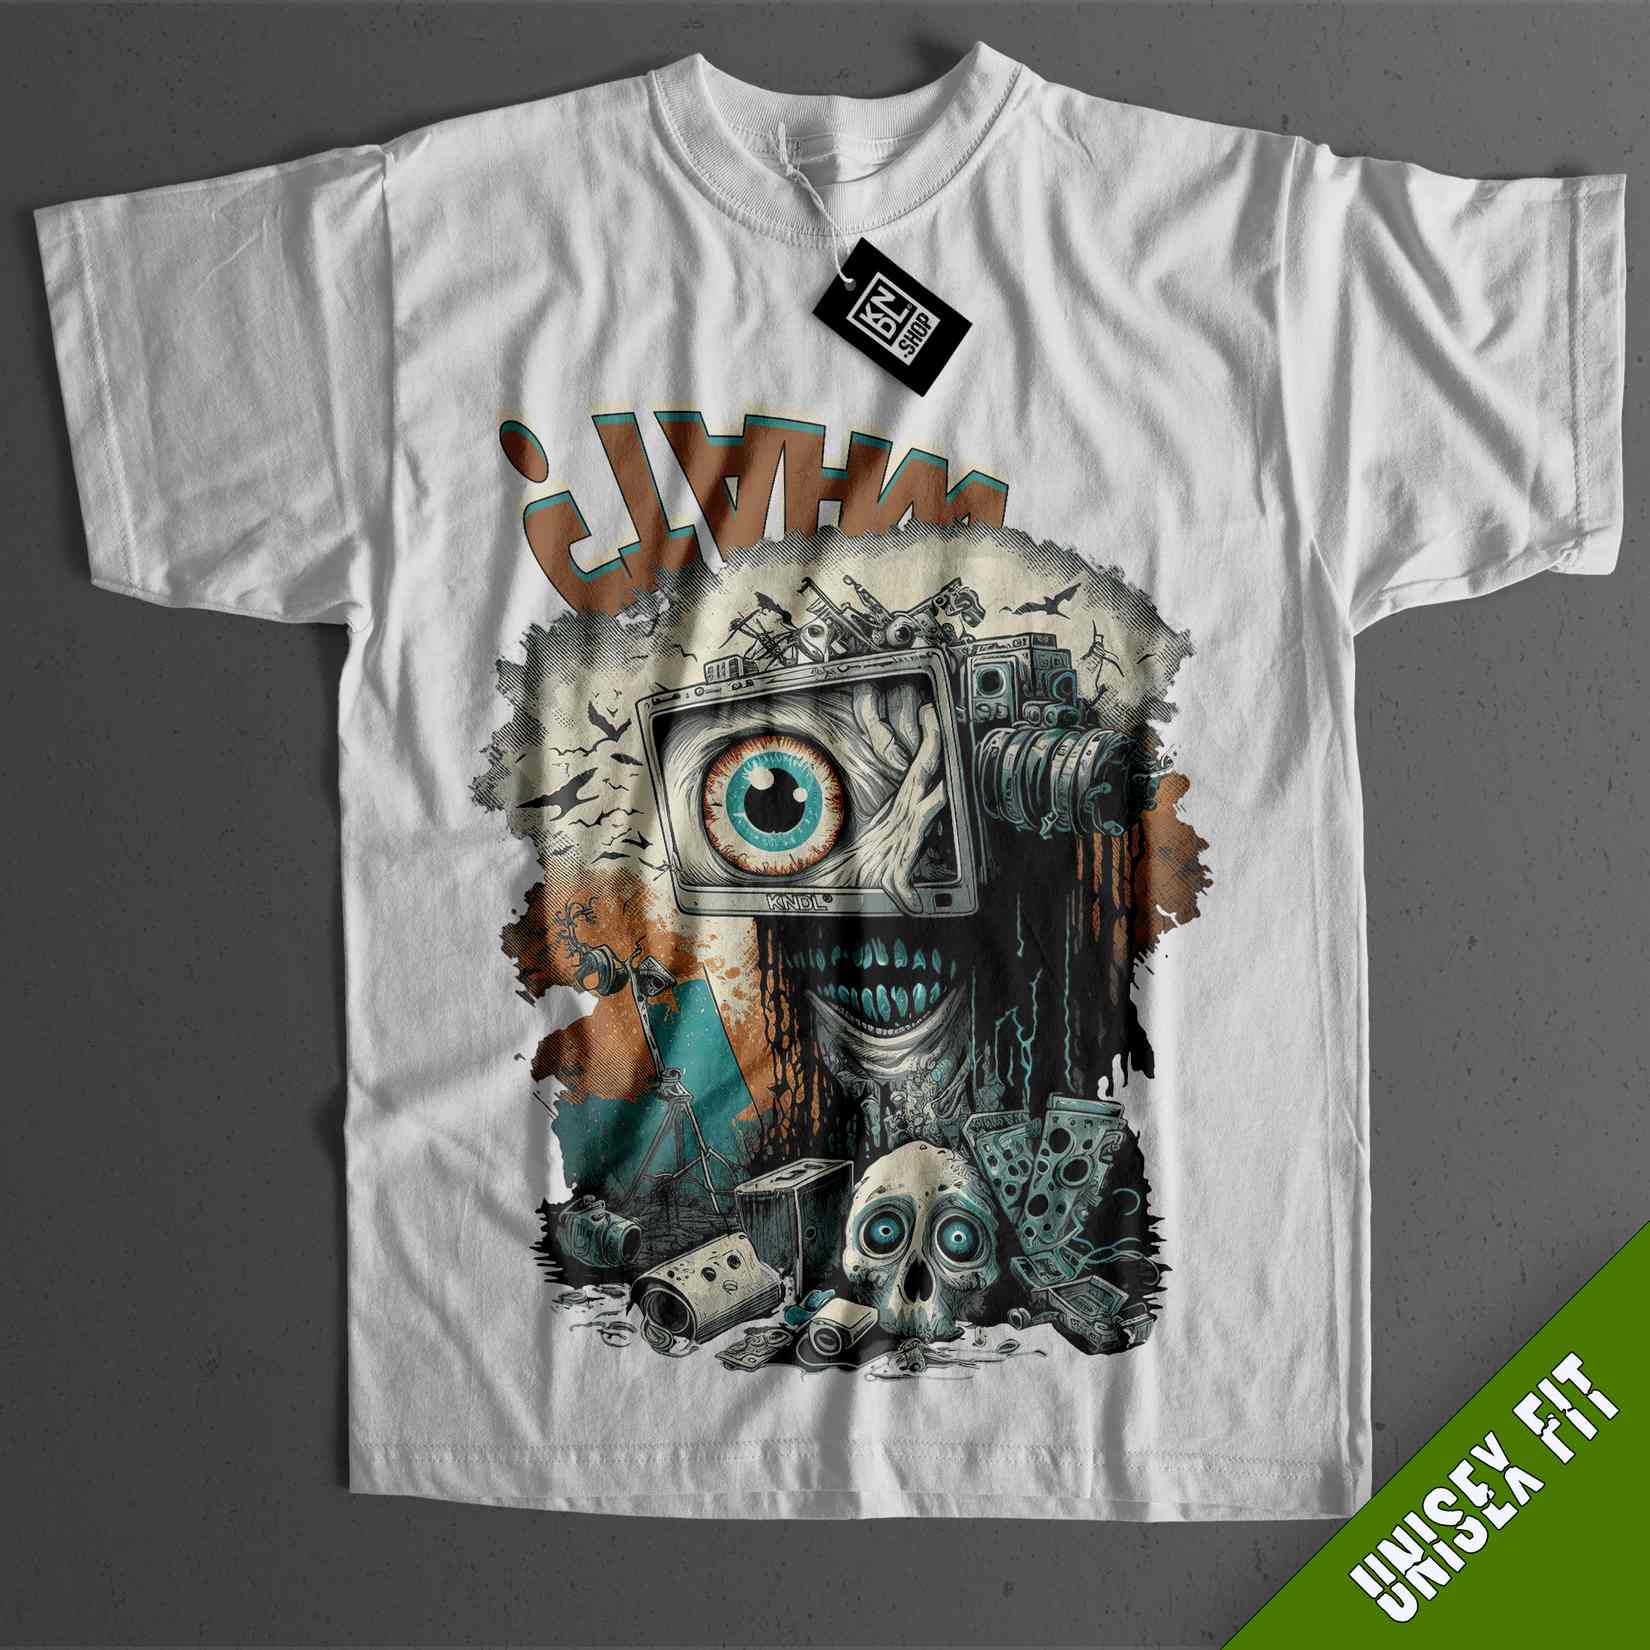 a white t - shirt with an image of a camera and a skull on it